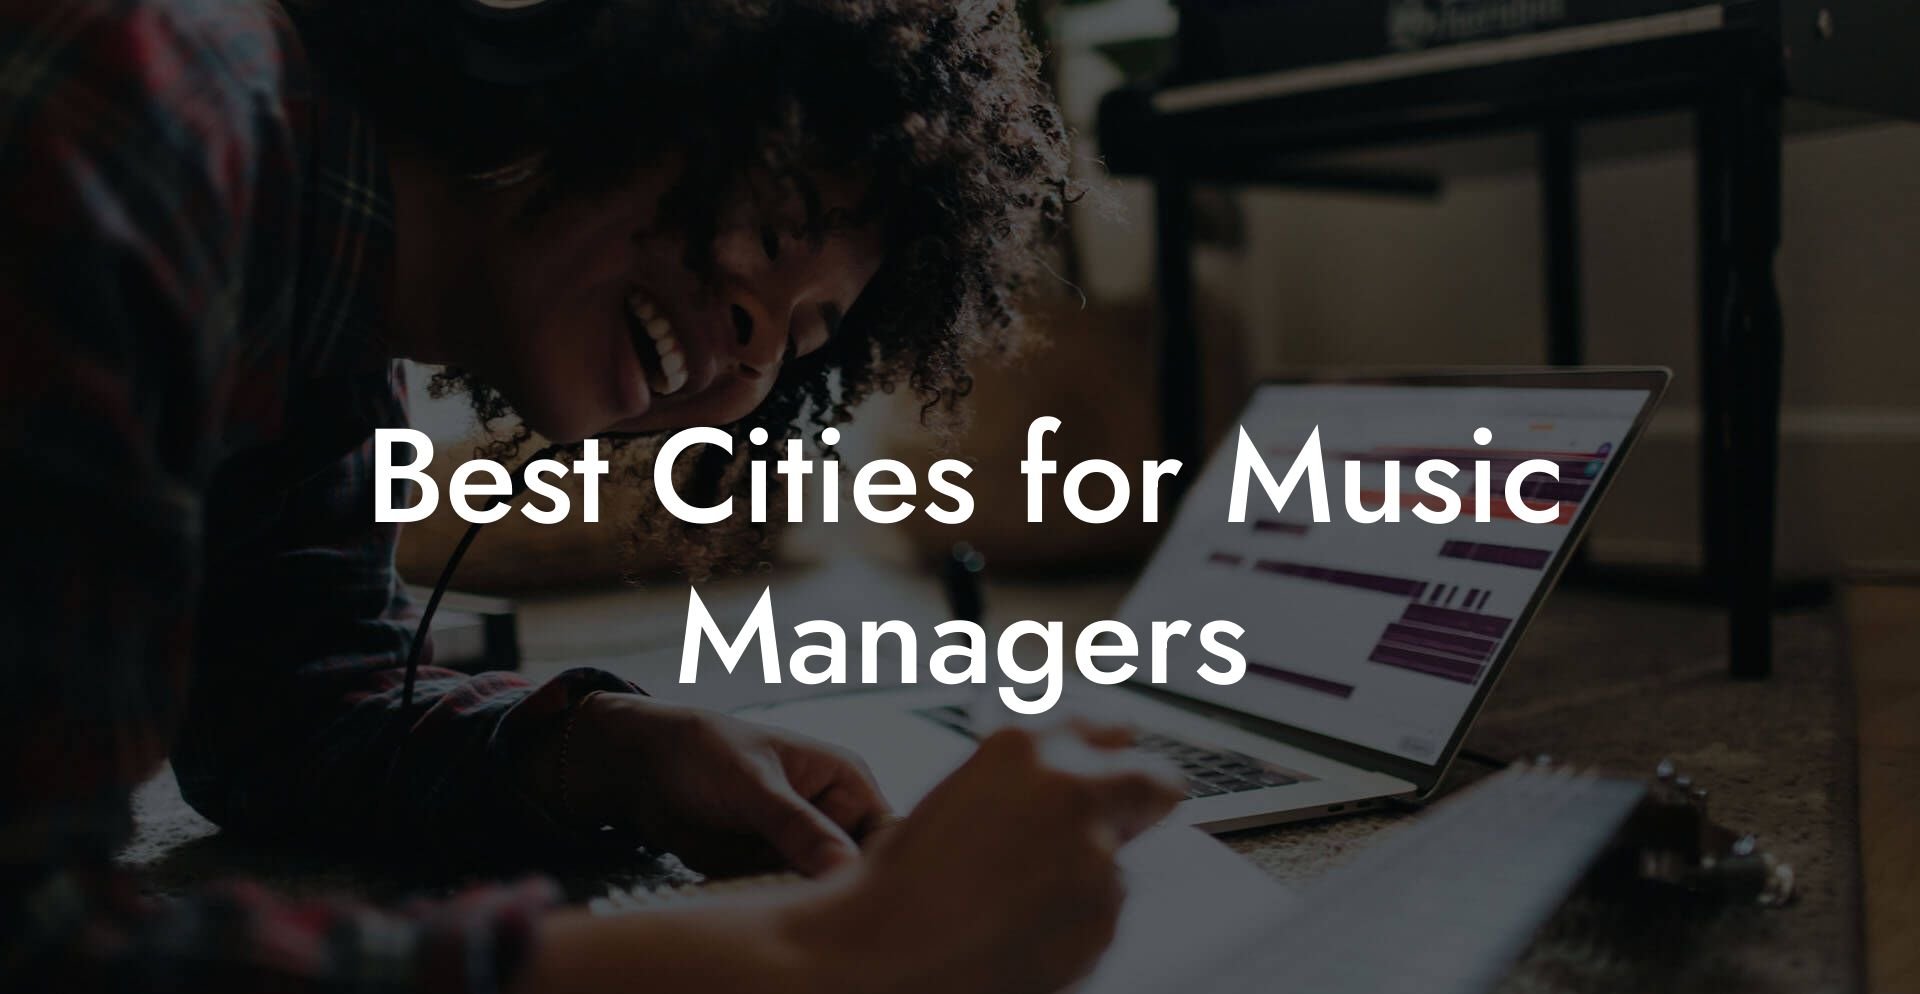 Best Cities for Music Managers